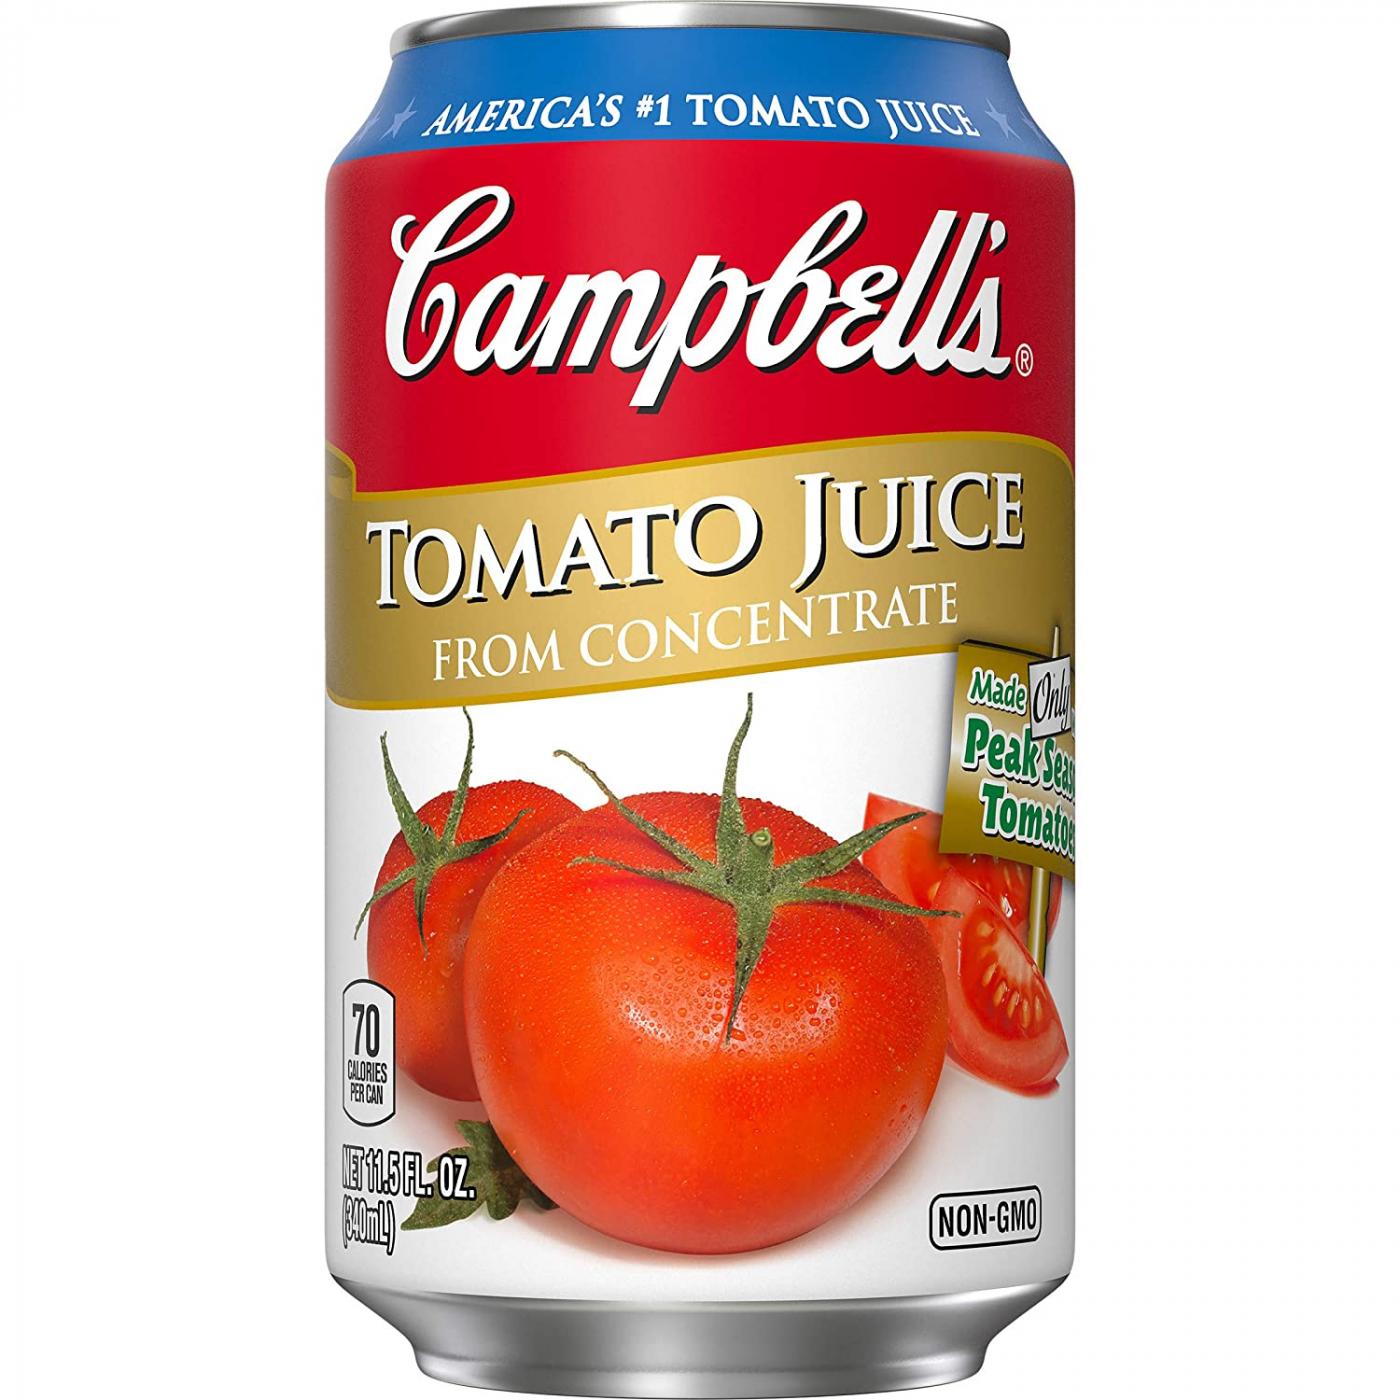 Tomato juice campbell 11 oz cans (24u.) 